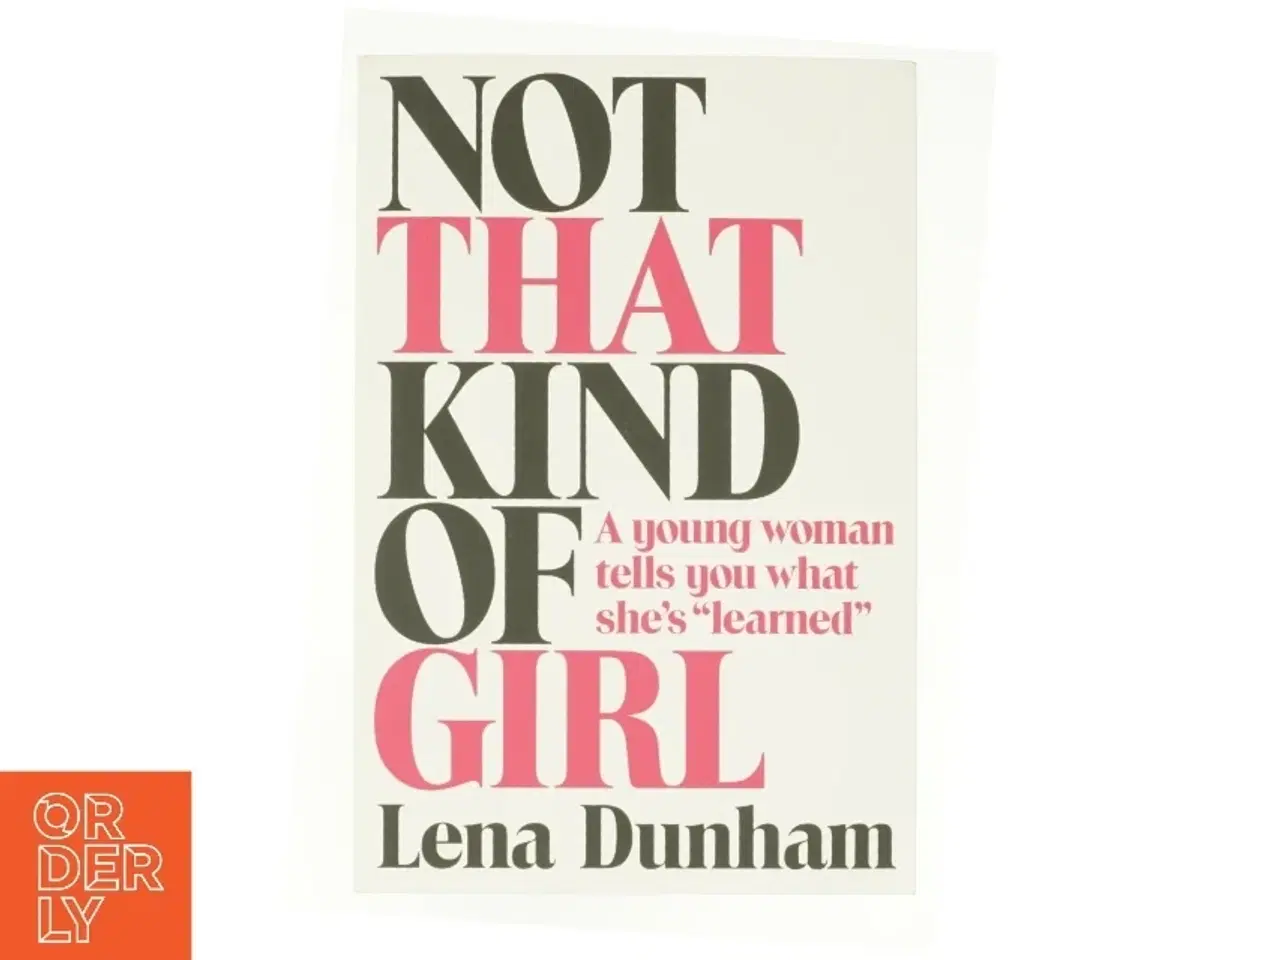 Billede 1 - Not that kind of girl : a young woman tells you what she's "learned" af Lena Dunham (Bog)